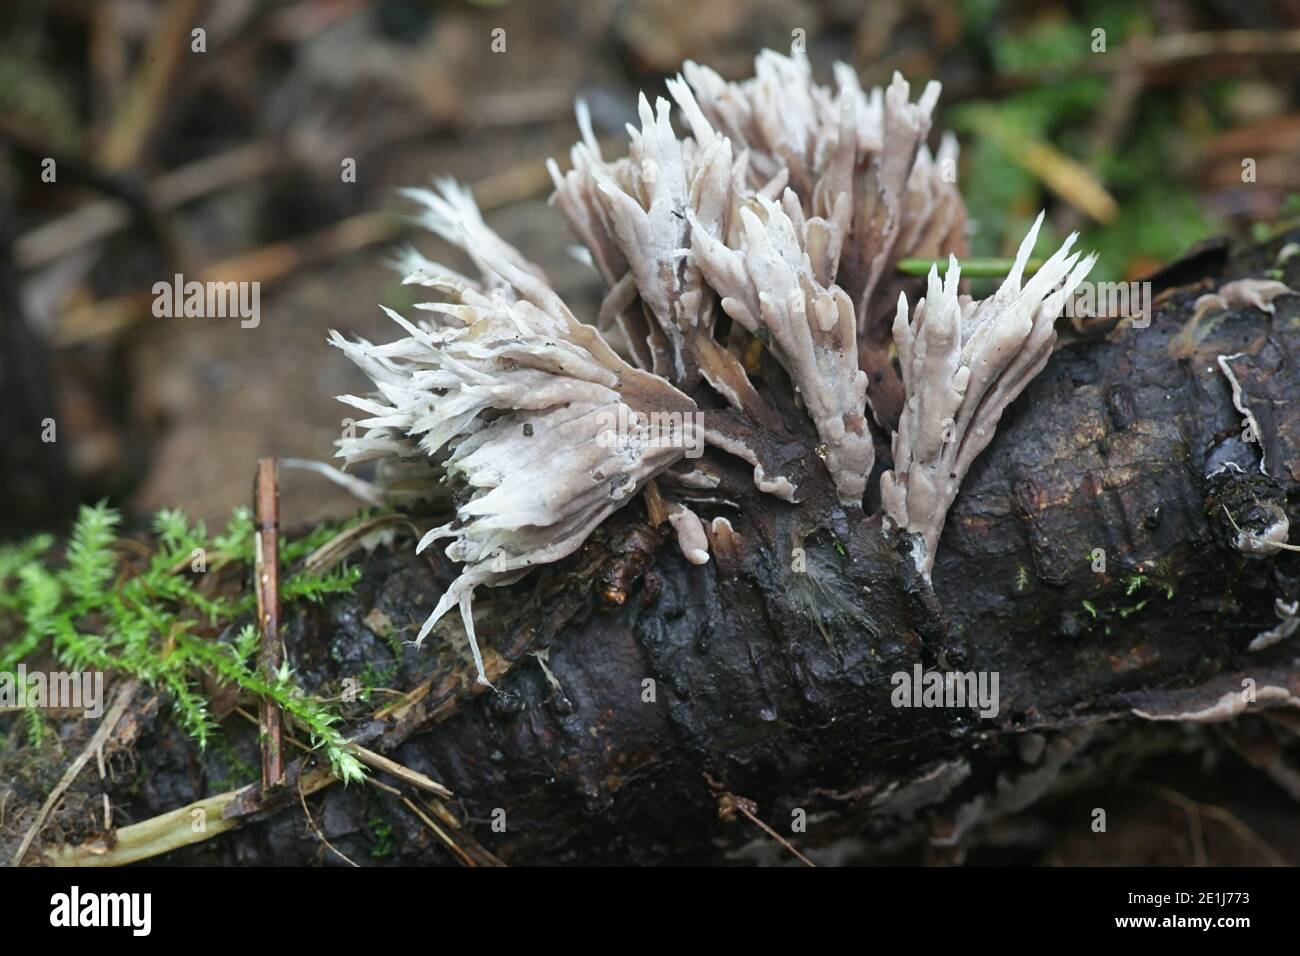 Thelephora penicillata (syn. Phylacteria mollissima), known as Urchin earthfan, wild fungus from Finland Stock Photo